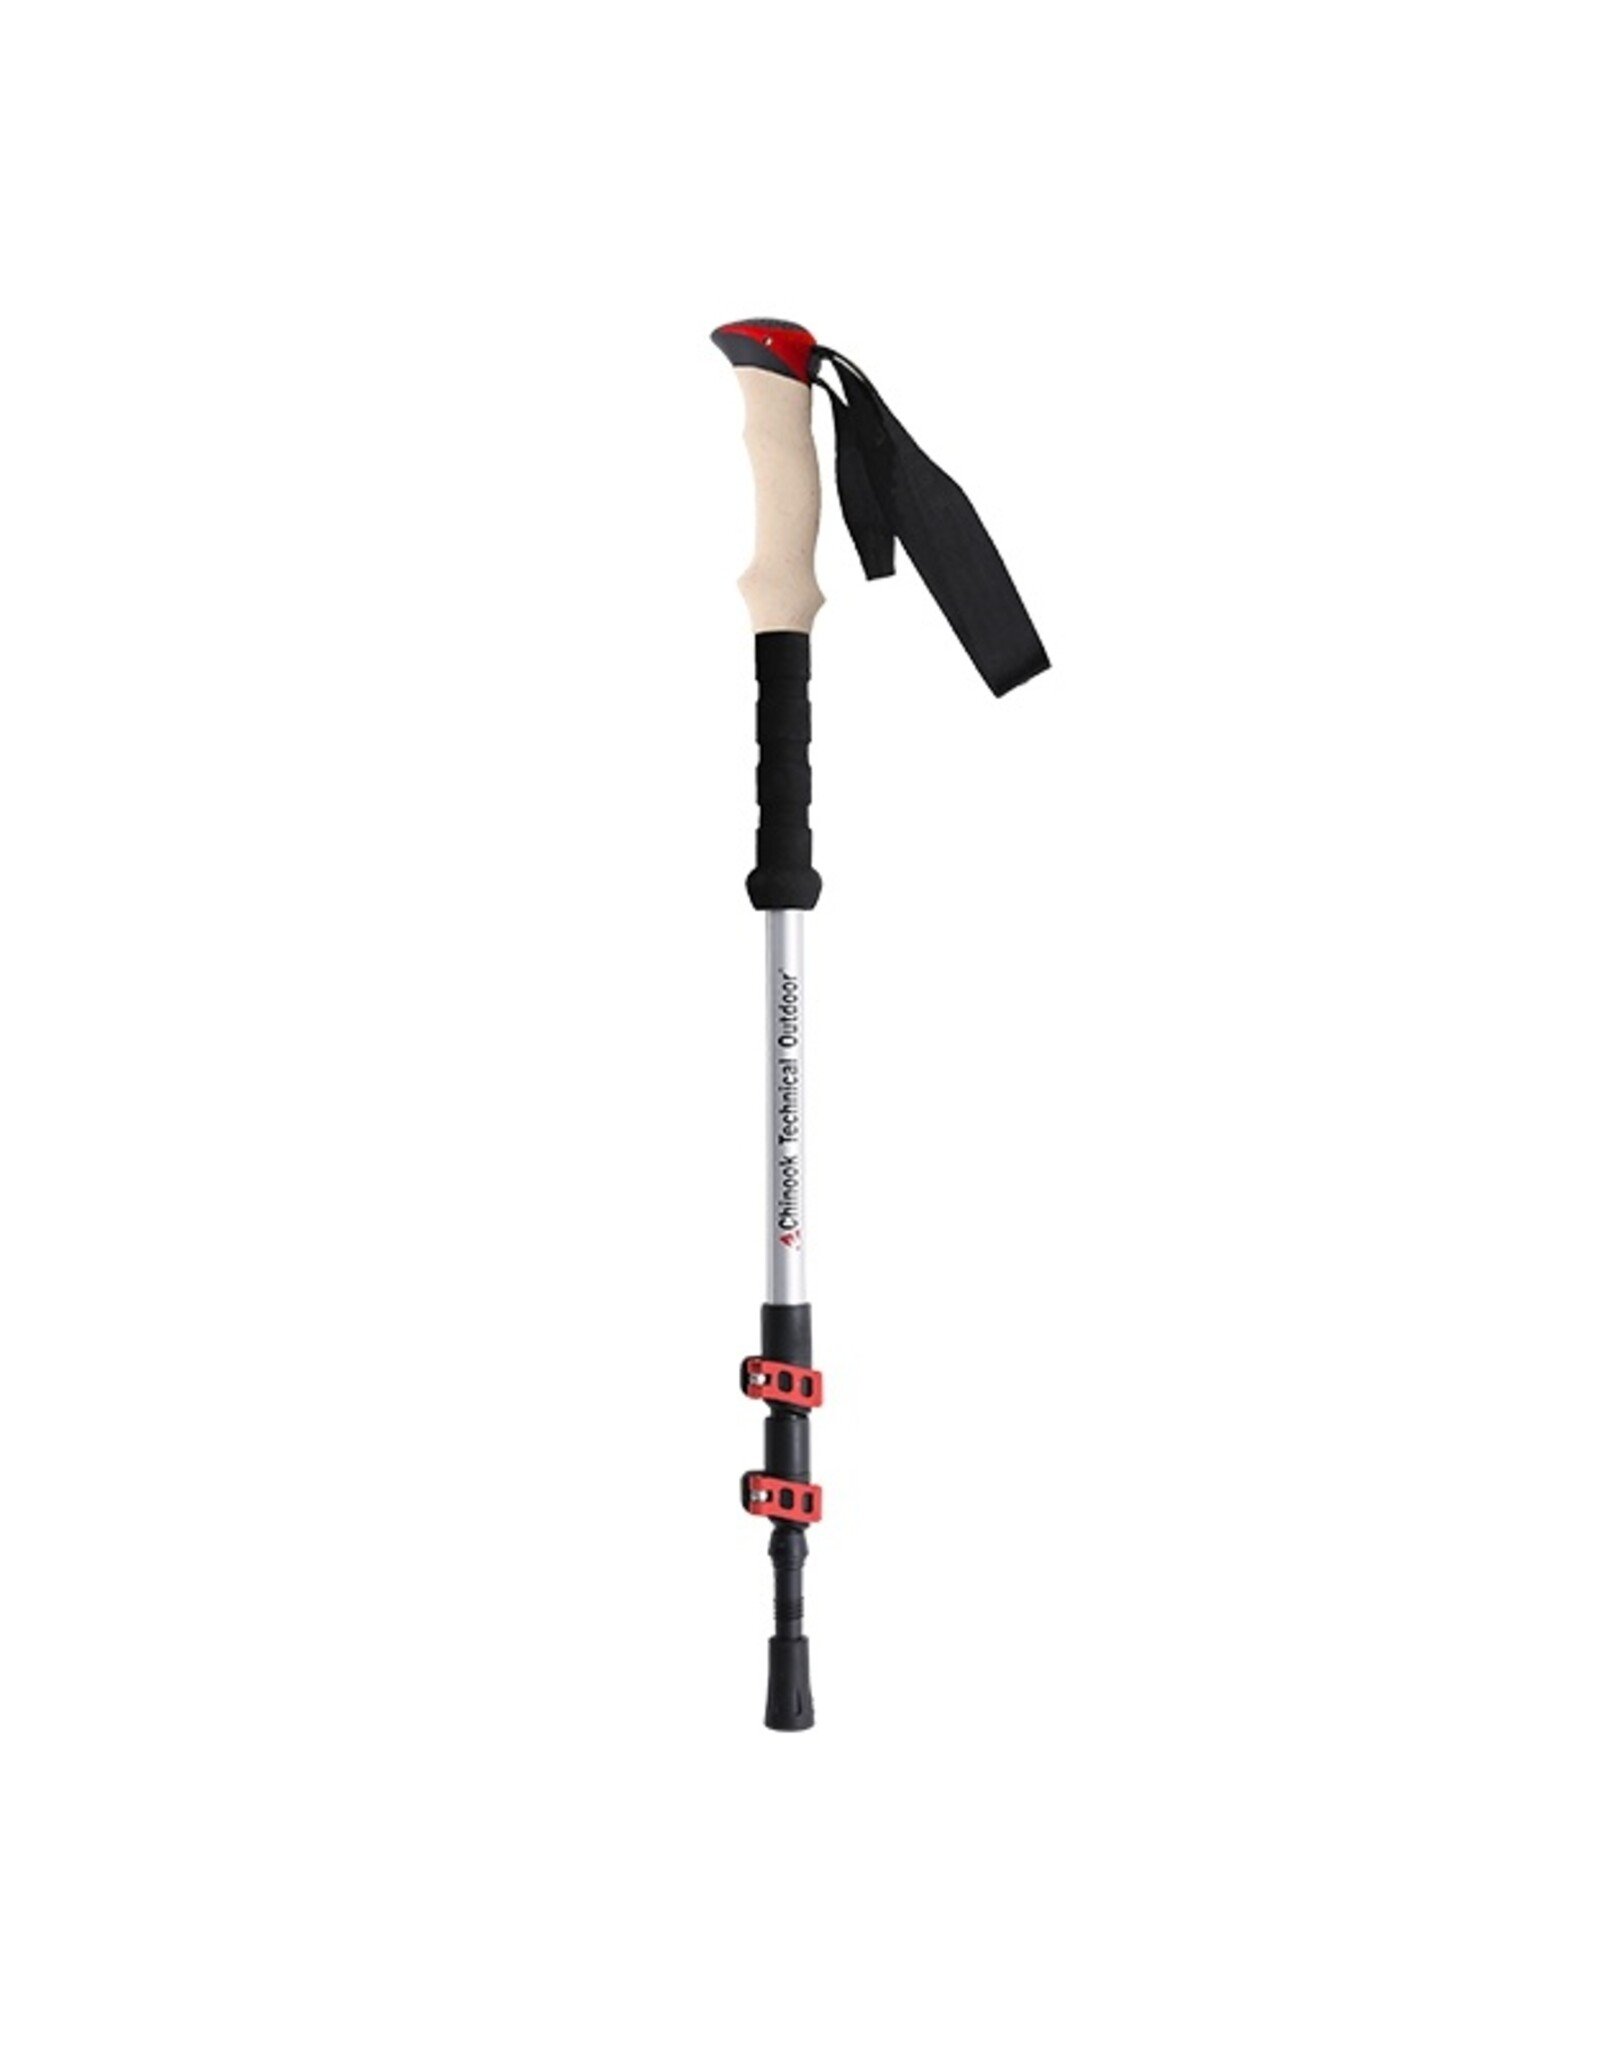 CHINOOK TECHNICAL OUTDOOR OUTBACK 3 ADJUSTABLE WALKING POLE